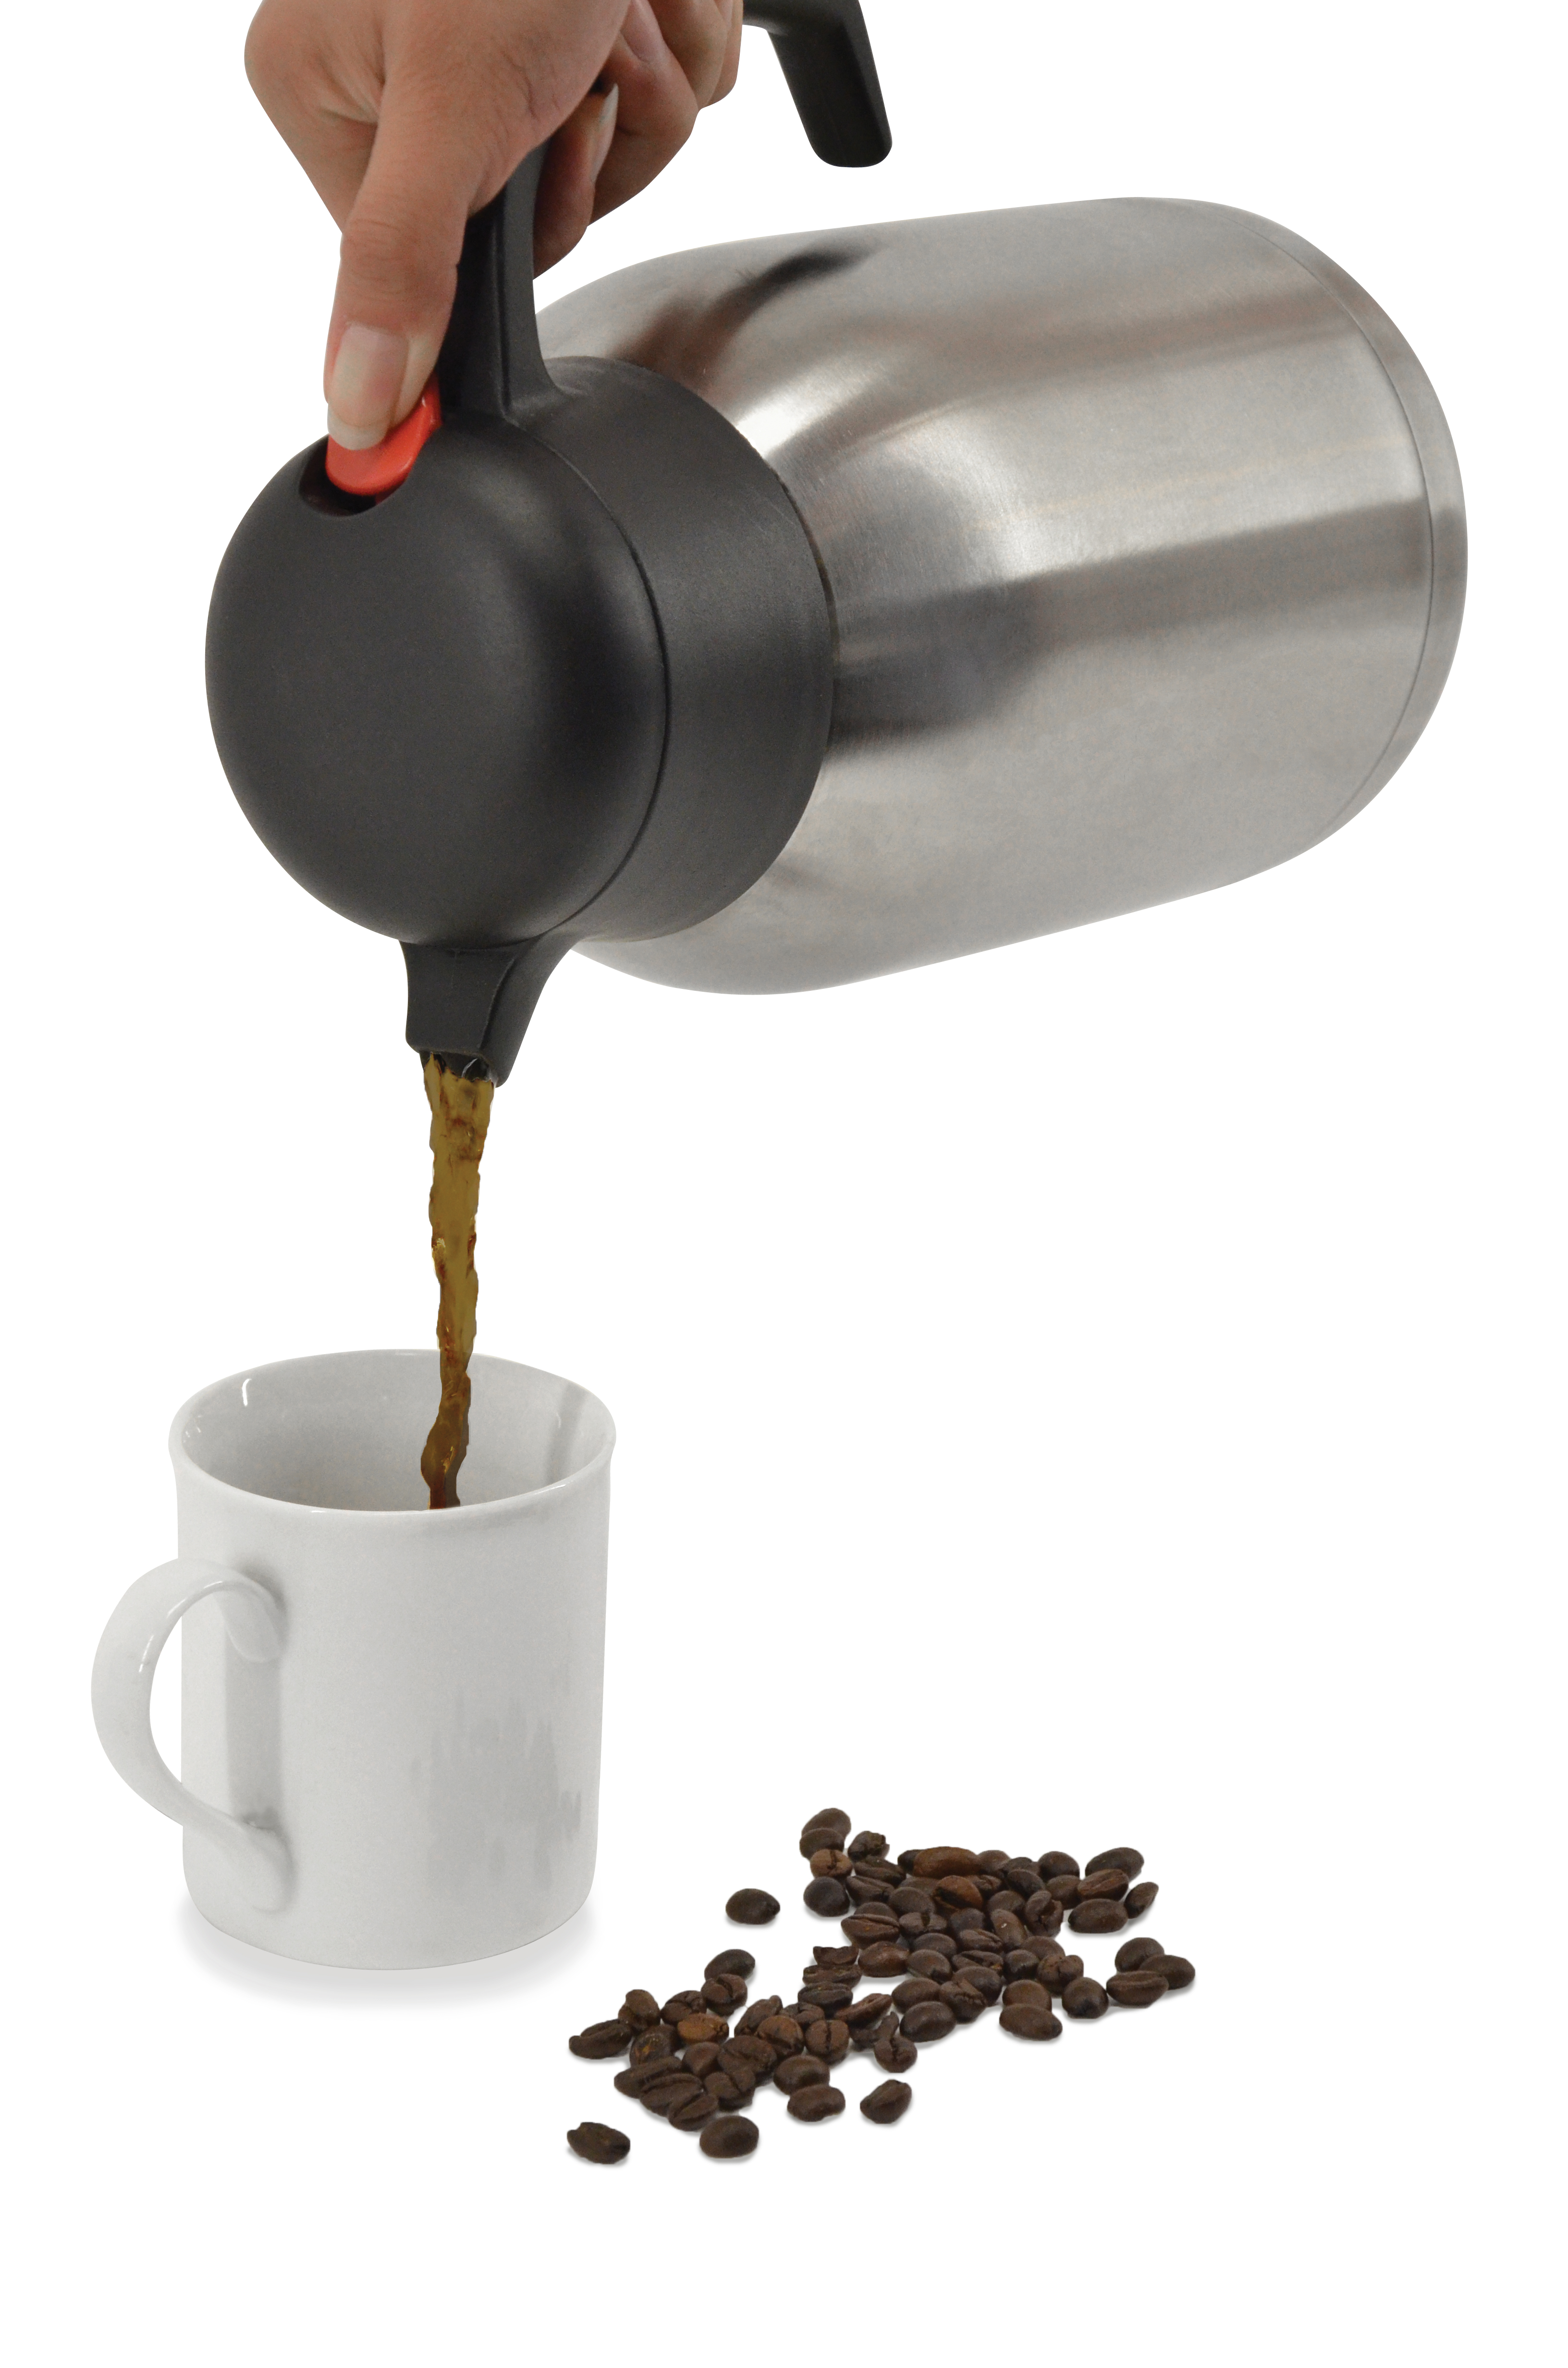 68 oz. (2 L) Double-Wall Insulated Stainless Steel Thermal Coffee